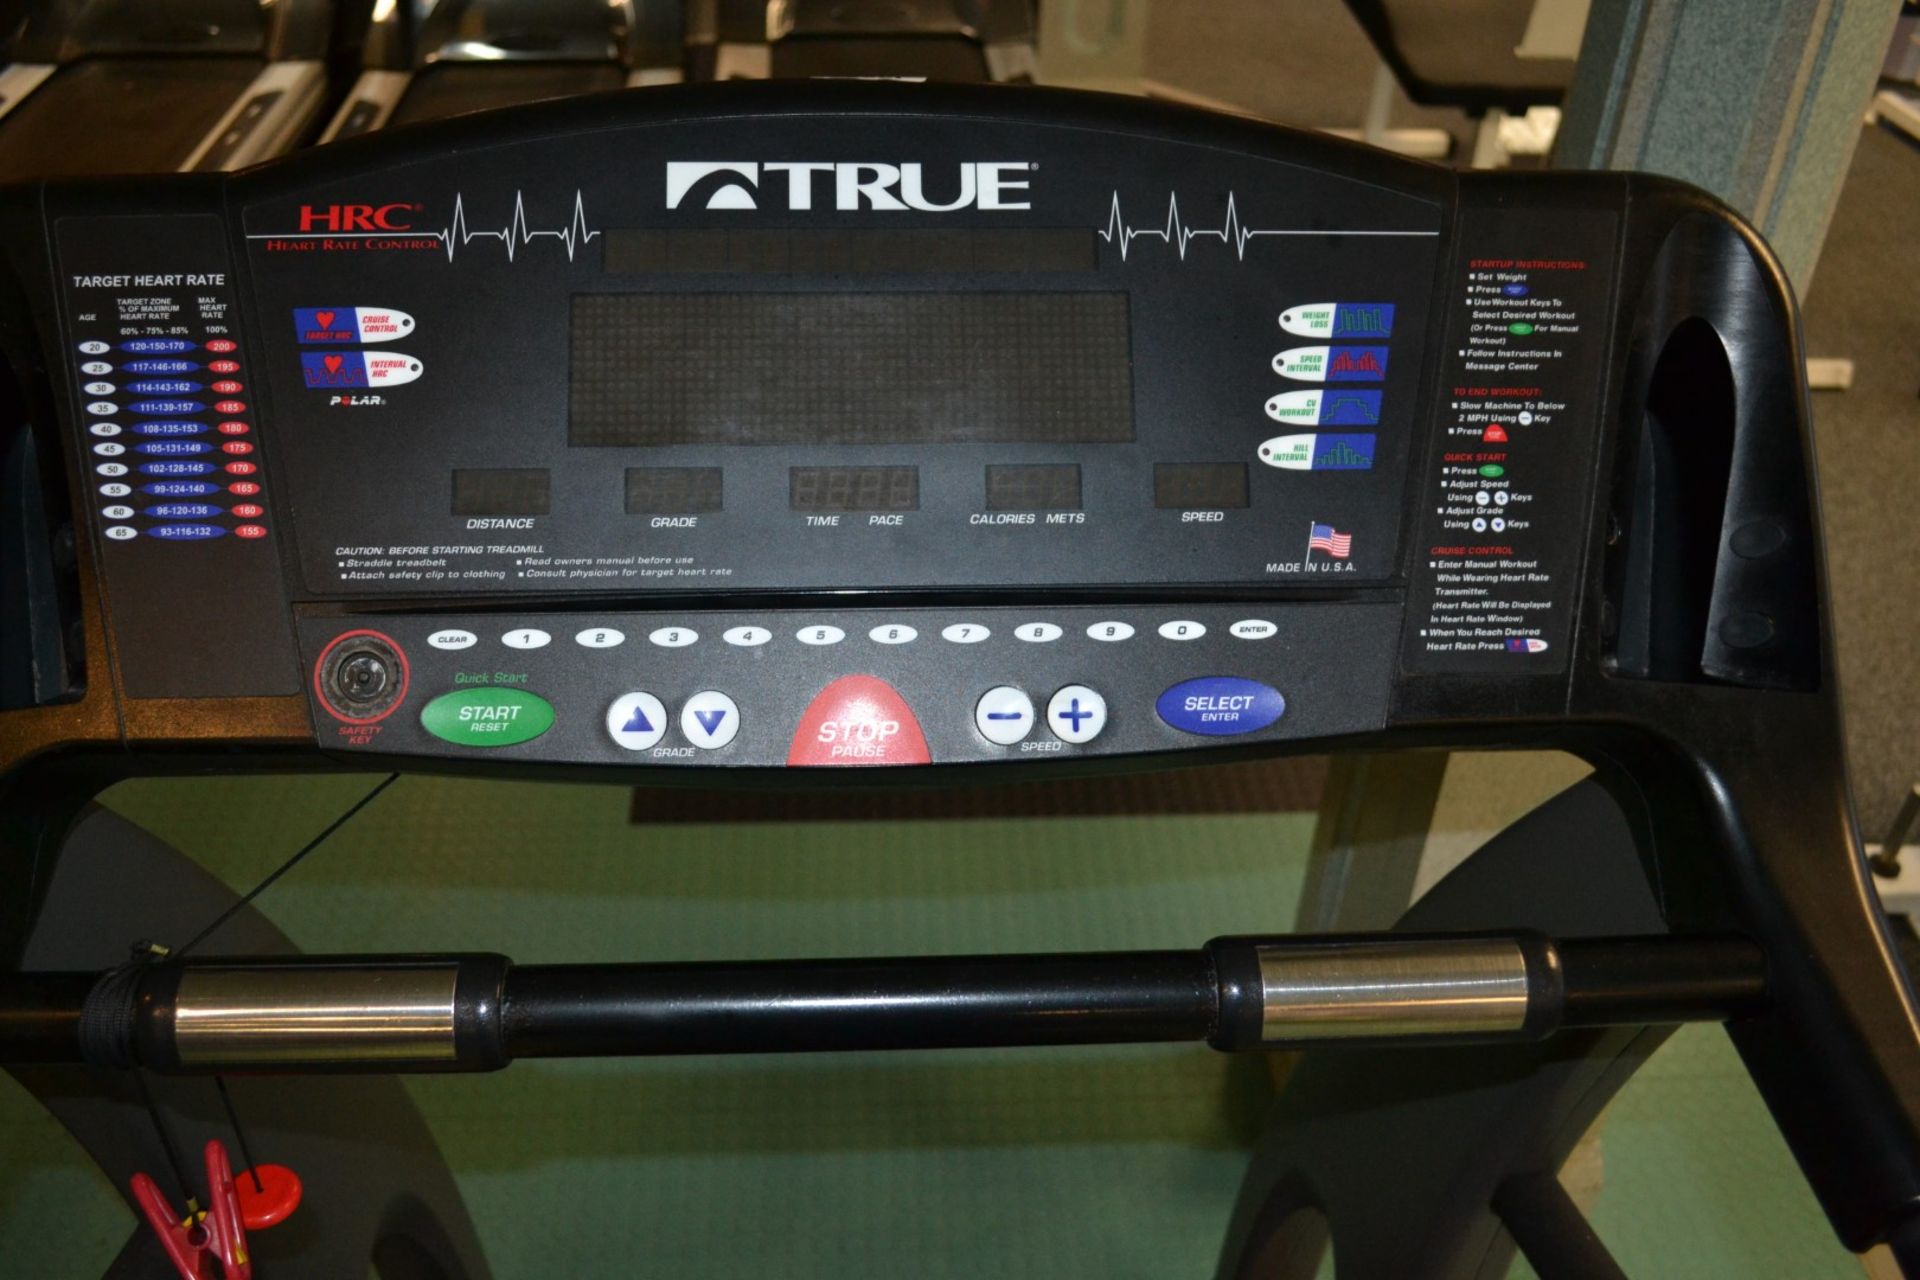 1 x True Fitness Commercial Treadmill With Heart Rate Control - Dimensions:L200 x W85 x H150cm - - Image 2 of 3